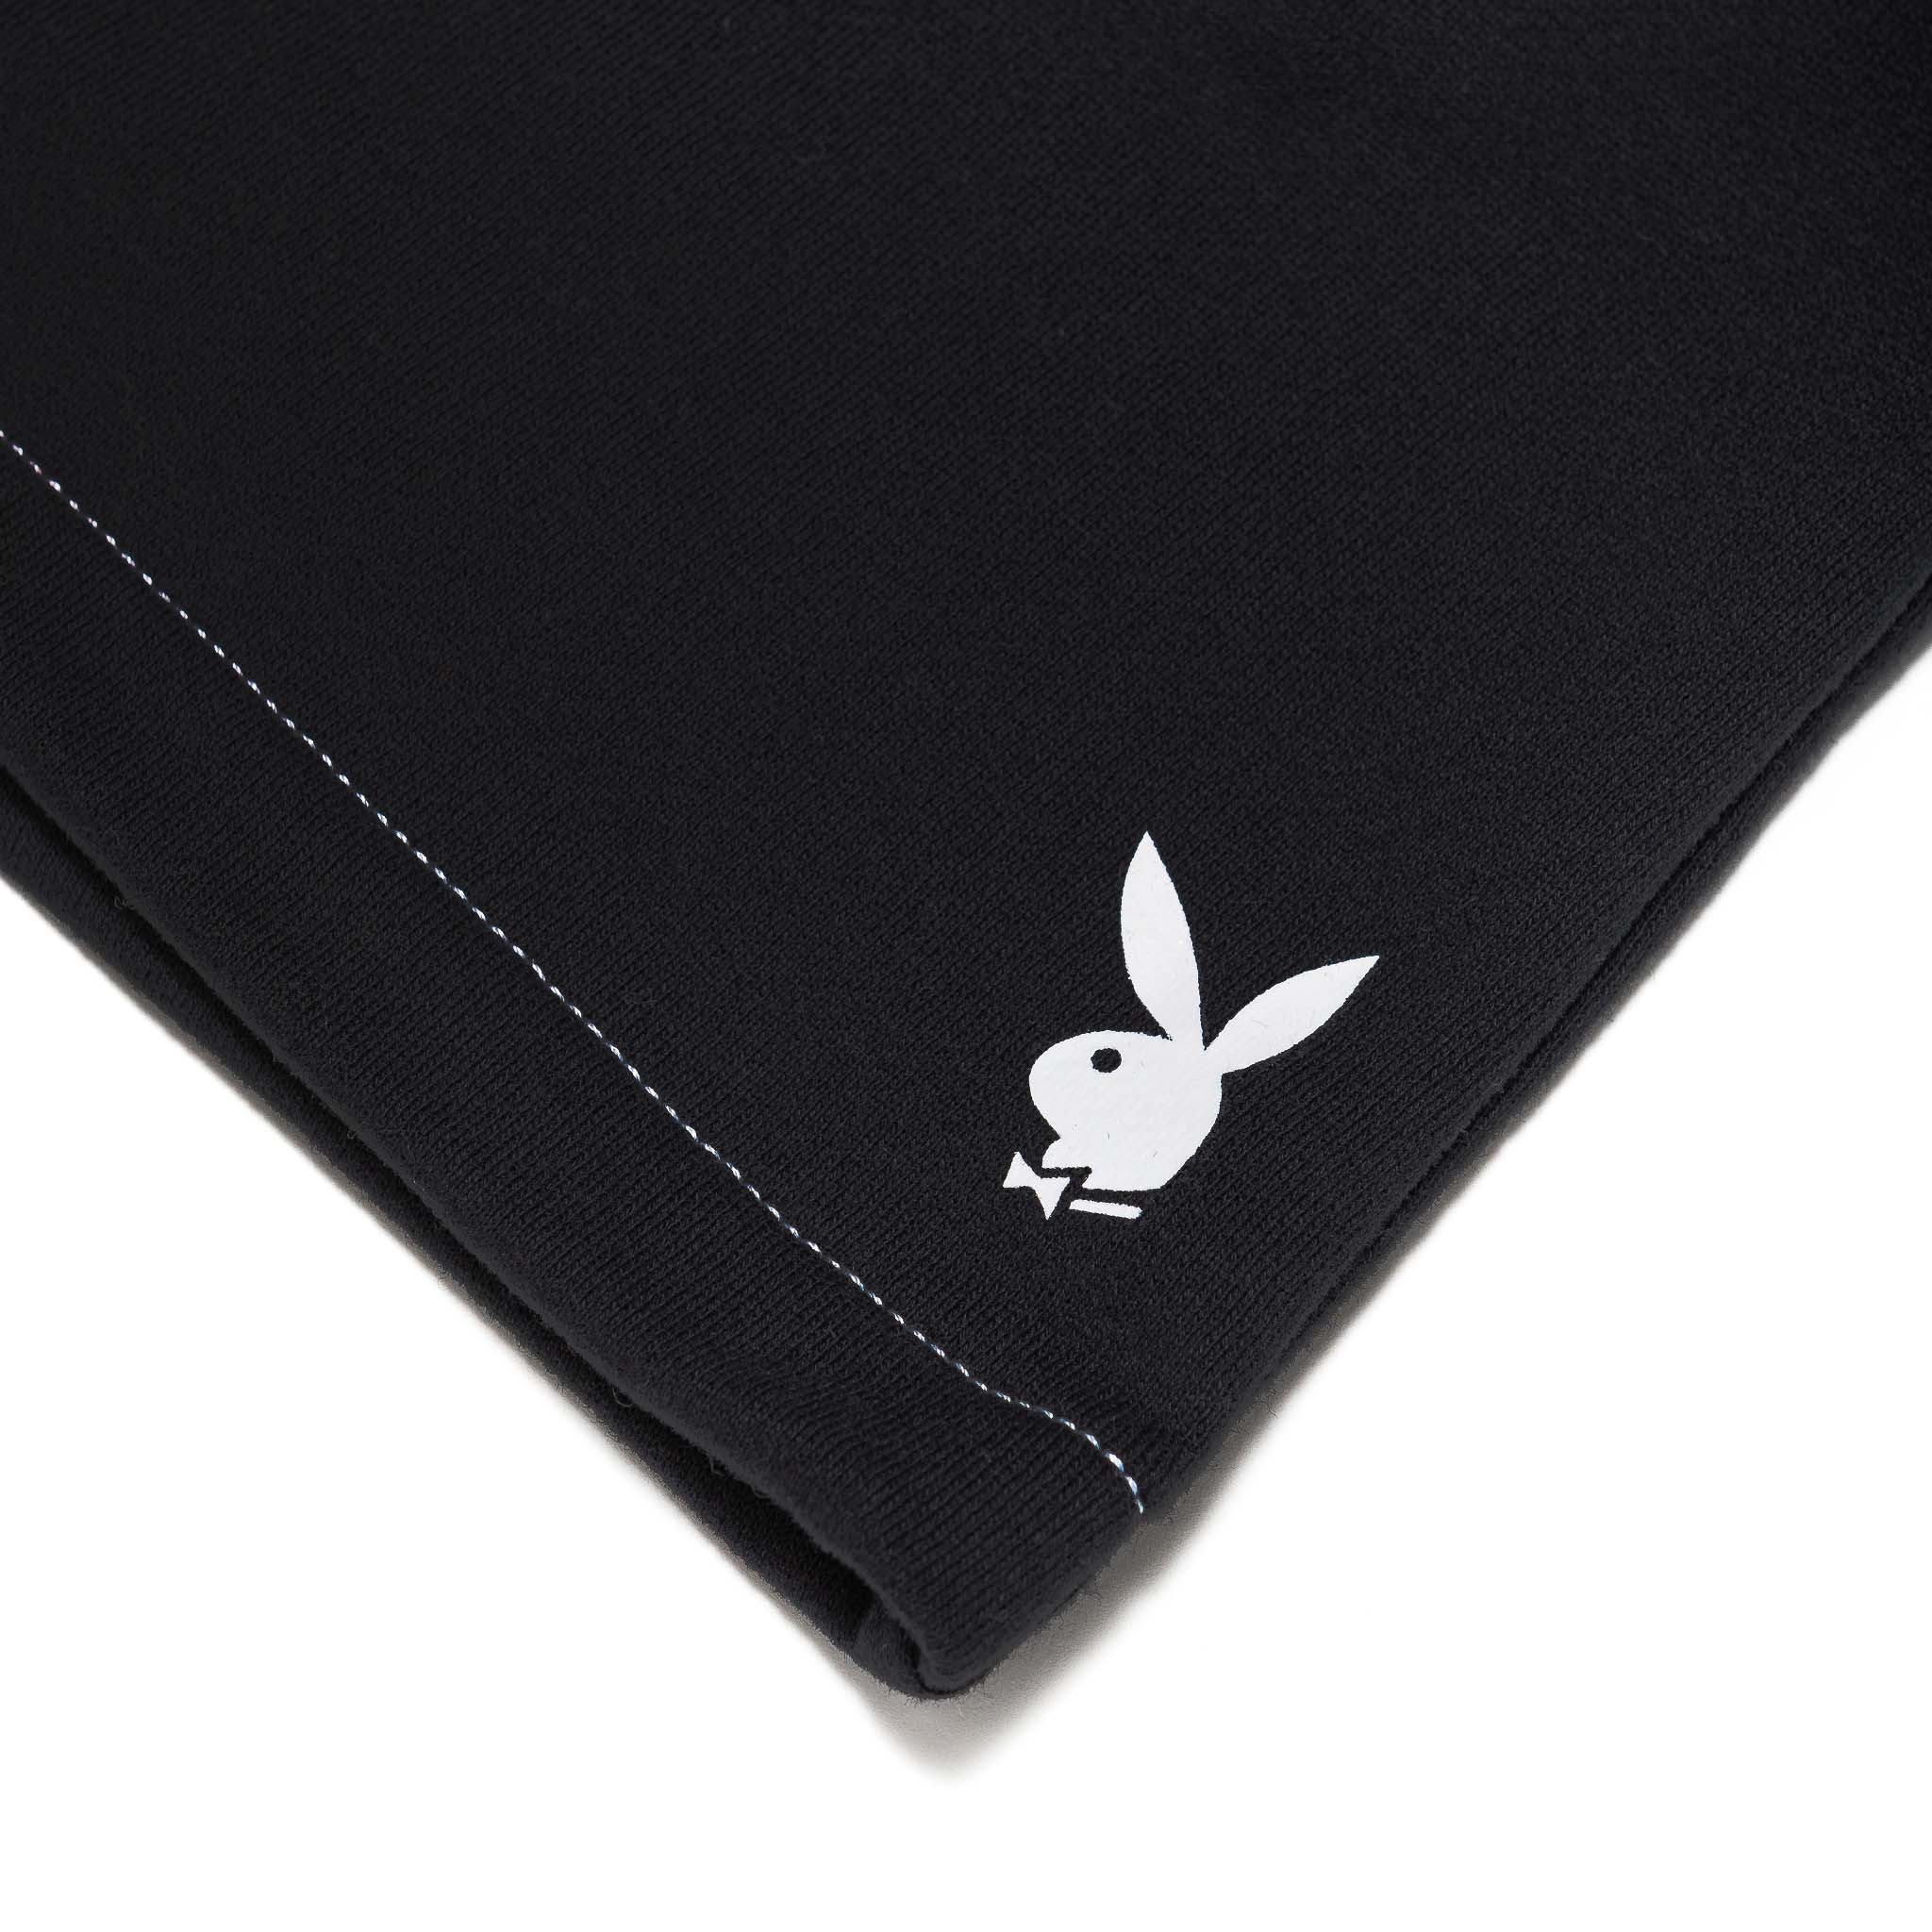 Y2K Playboy Collection | Unisex Shorts, Tanks | Playboy – Page 2